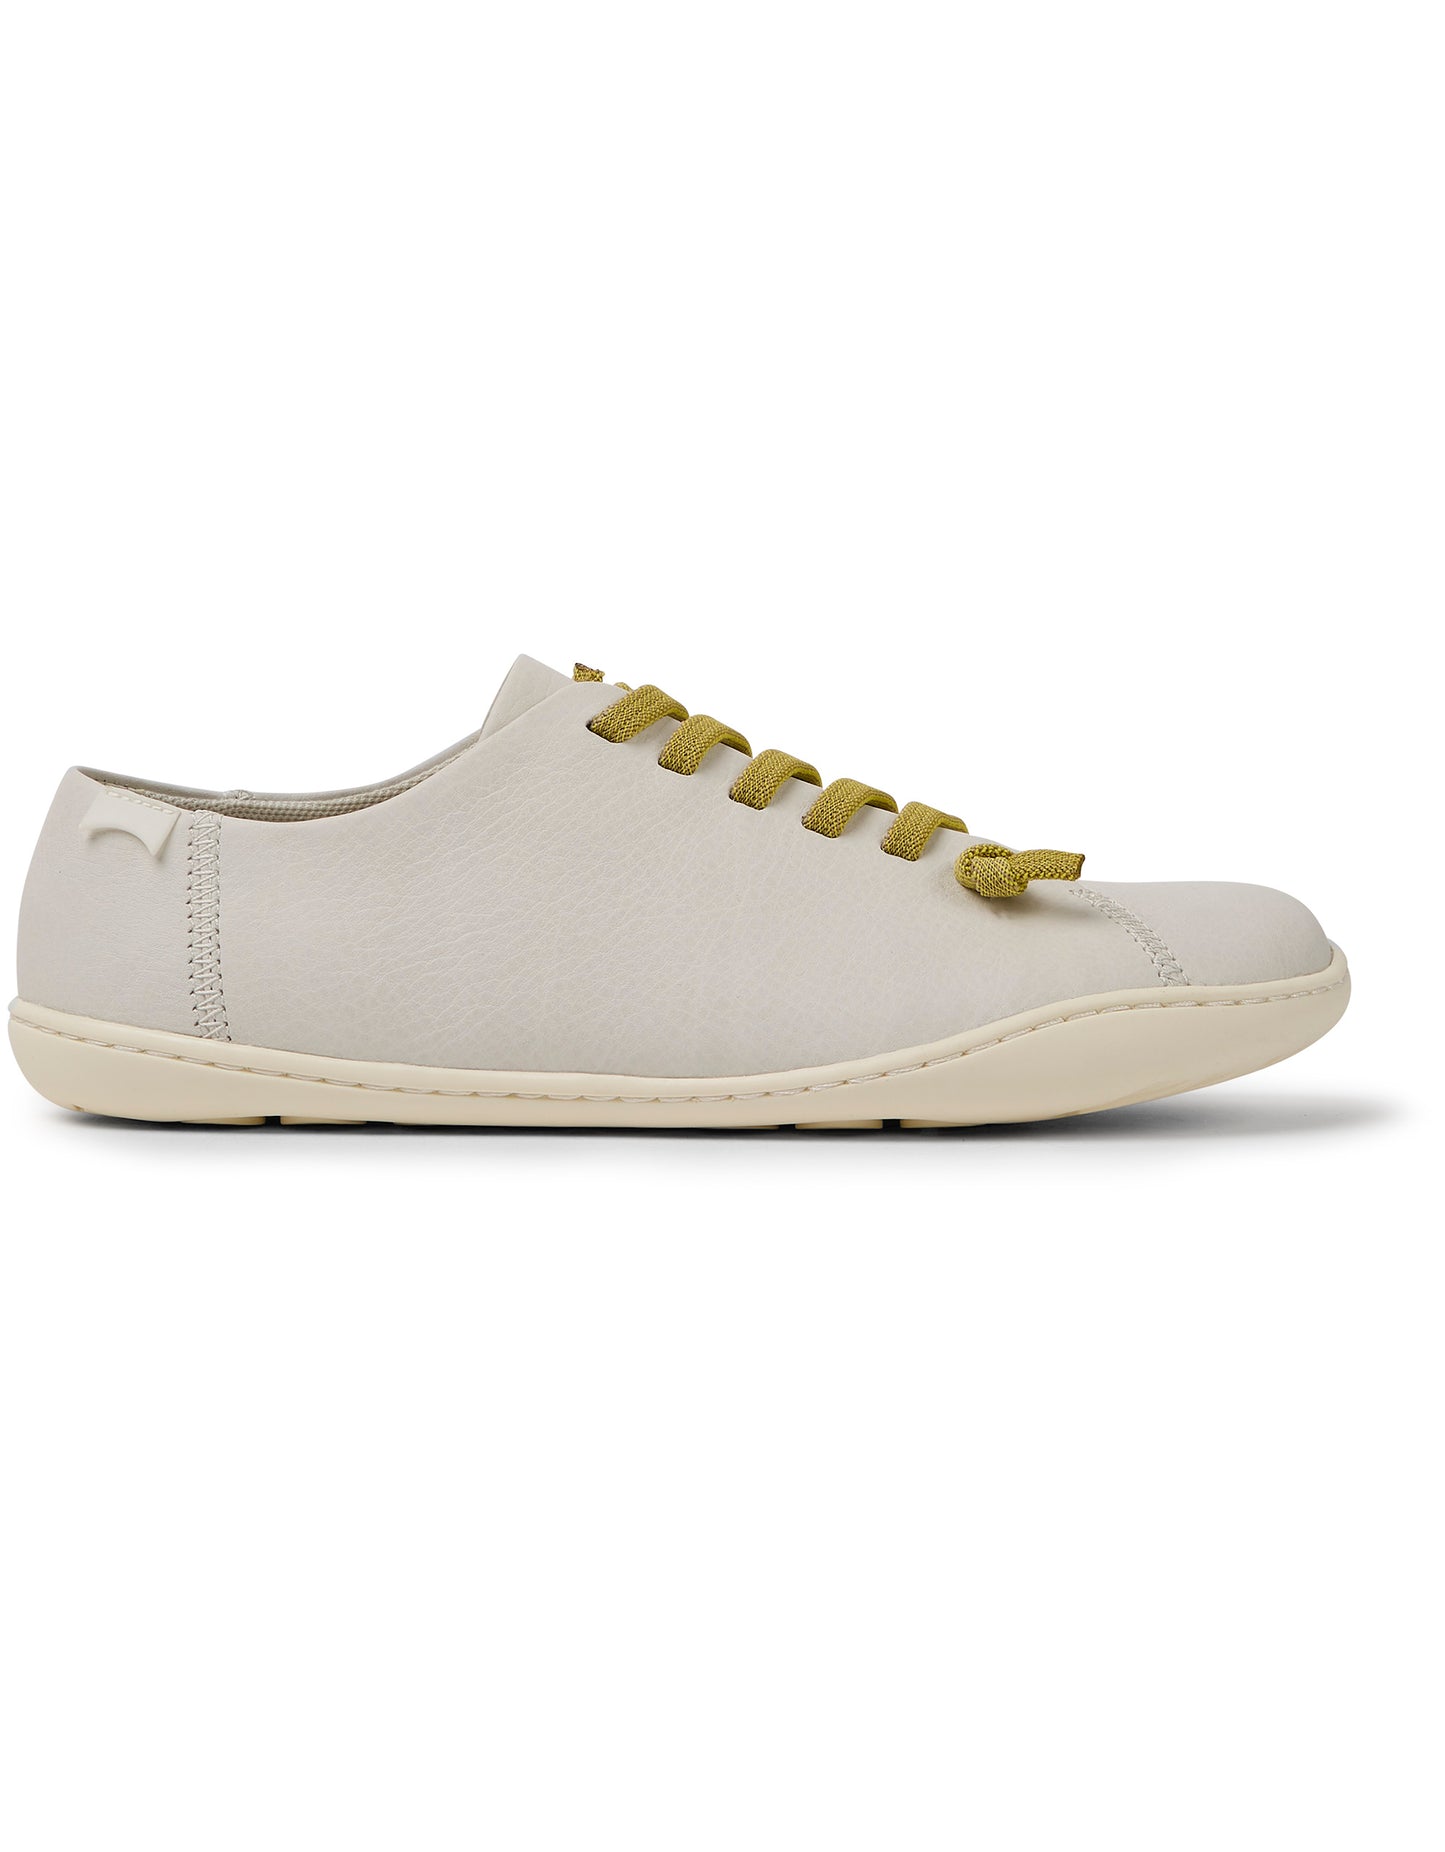 Camper k200514-014 peu white trainer with mustard laces - Imeldas Shoes Norwich